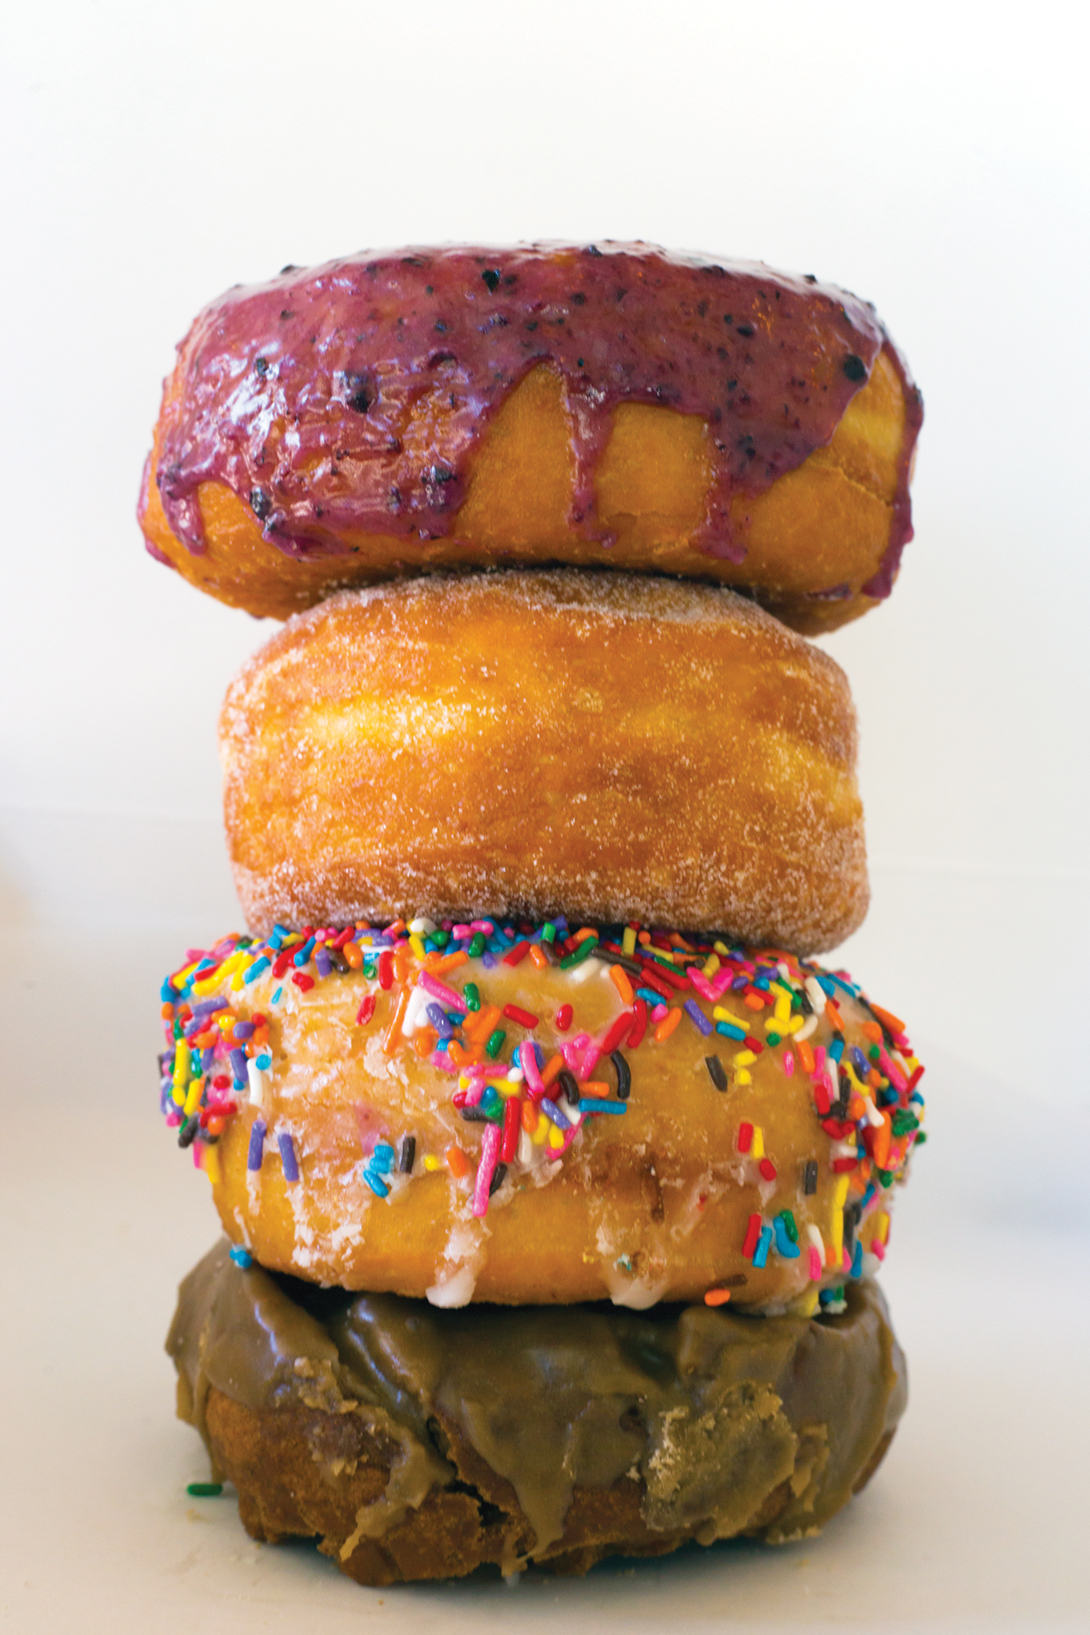 Doughnuts at Johnny Doughnuts is a great Marin dining option for MVFF attendees.